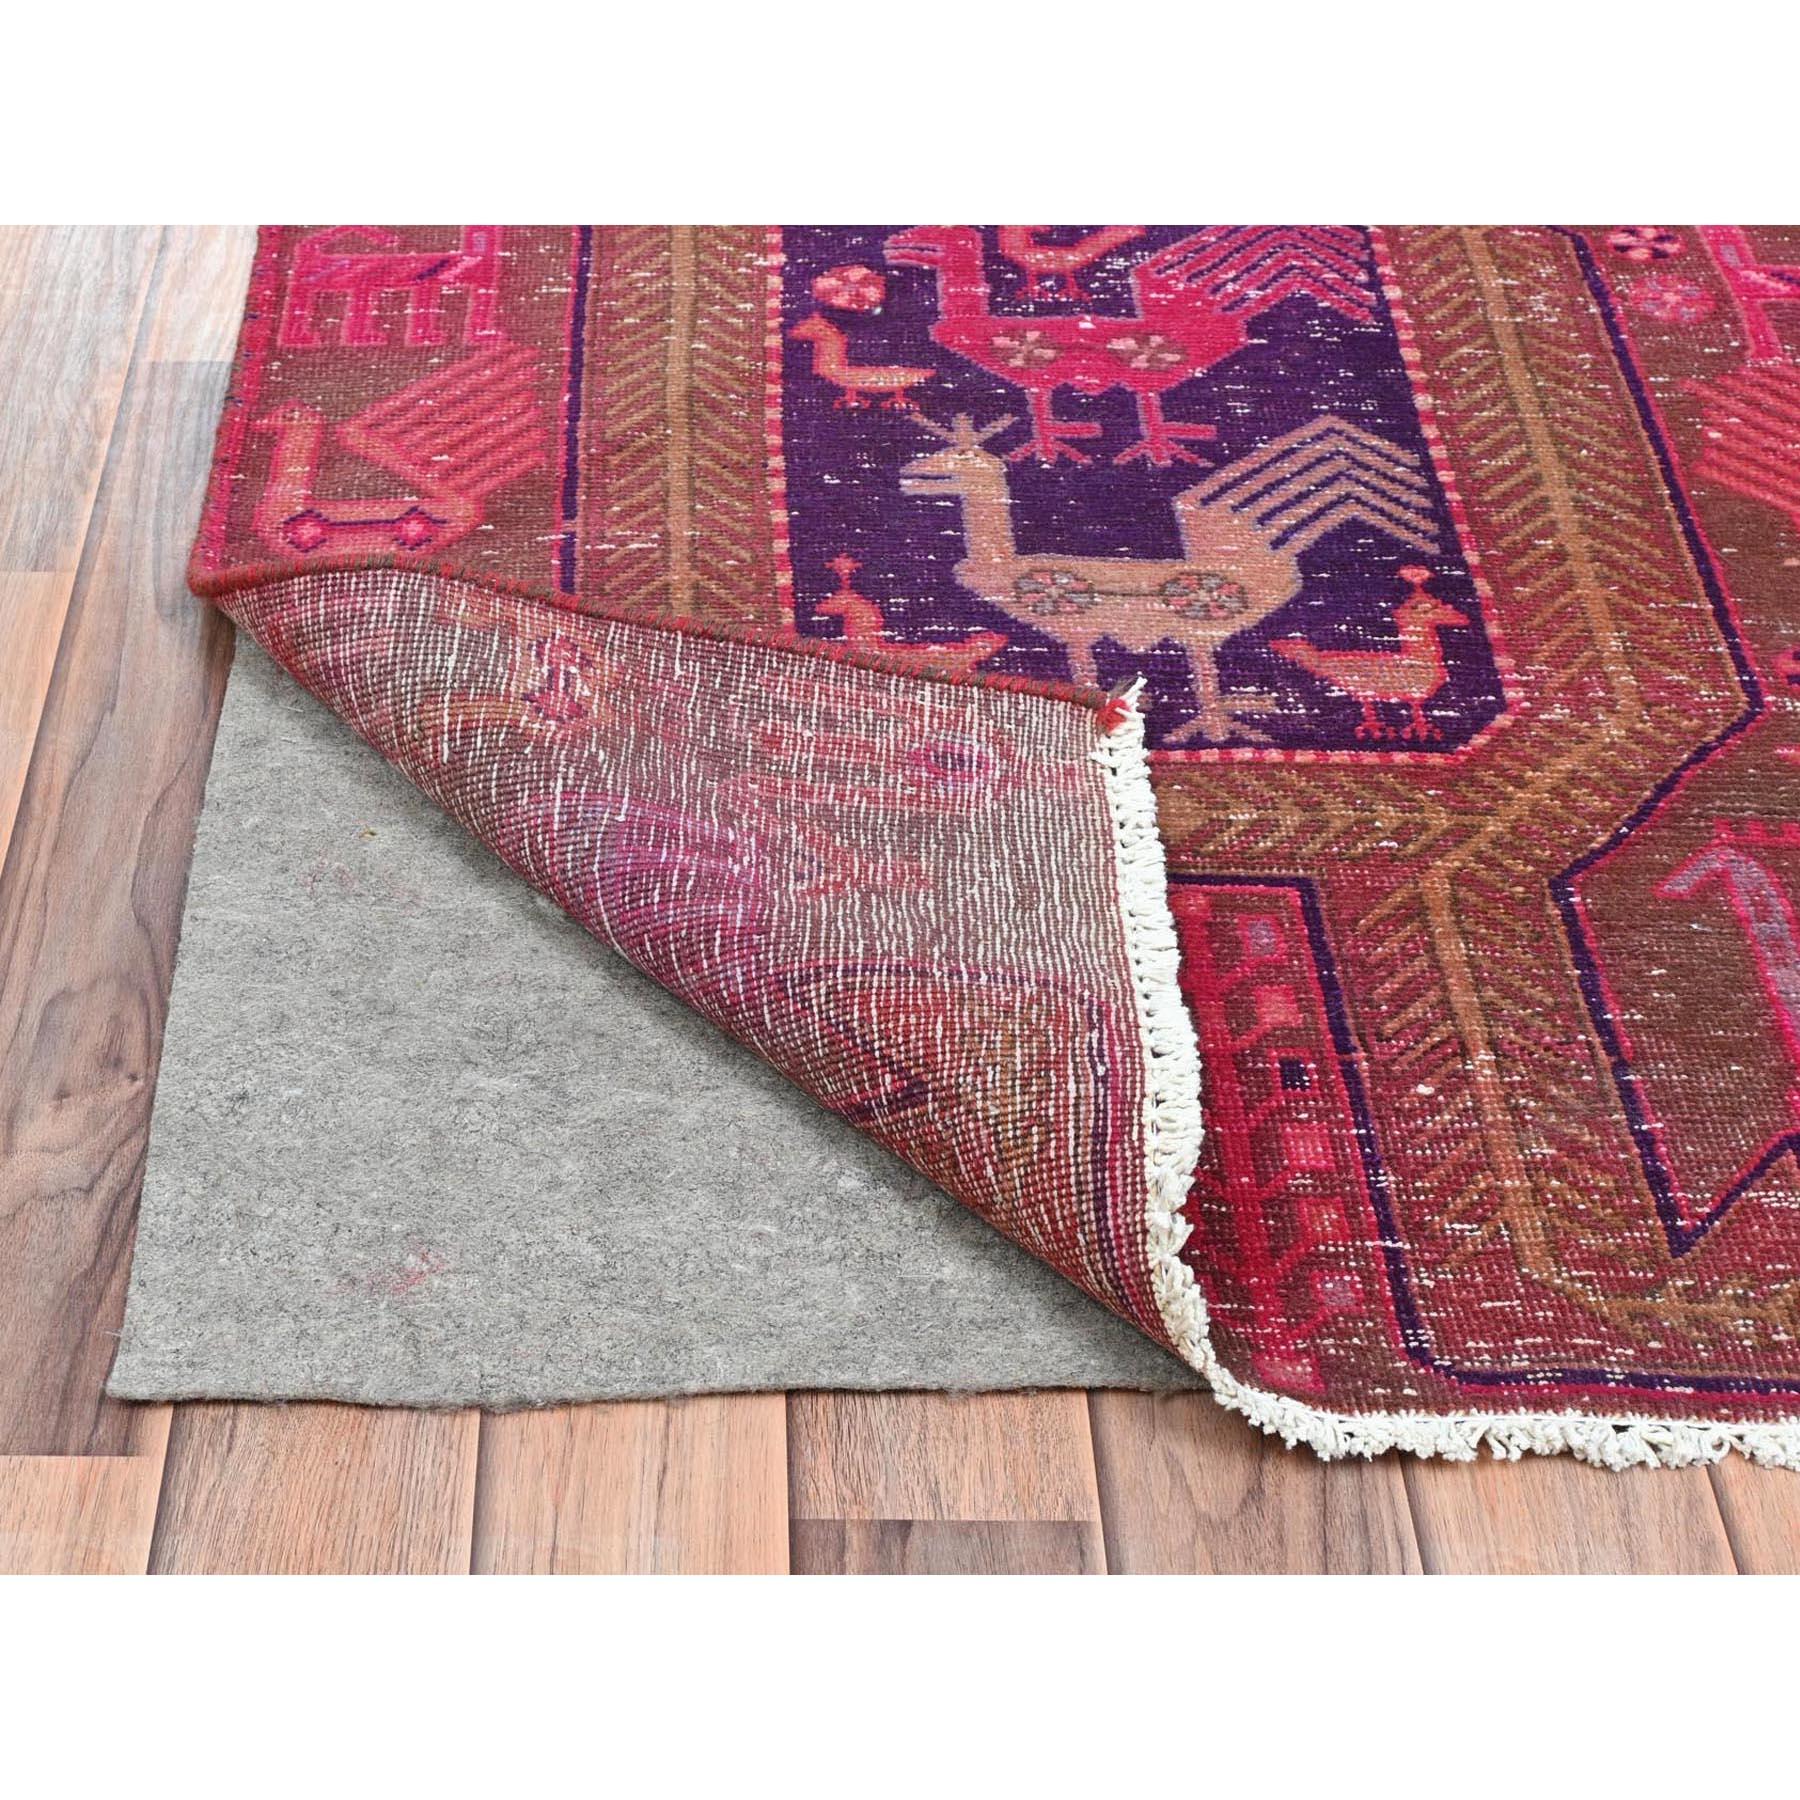 Medieval Hazelnut Brown with Pink & Purple, Northwest Persian, Hand Knotted Worn Wool Rug For Sale